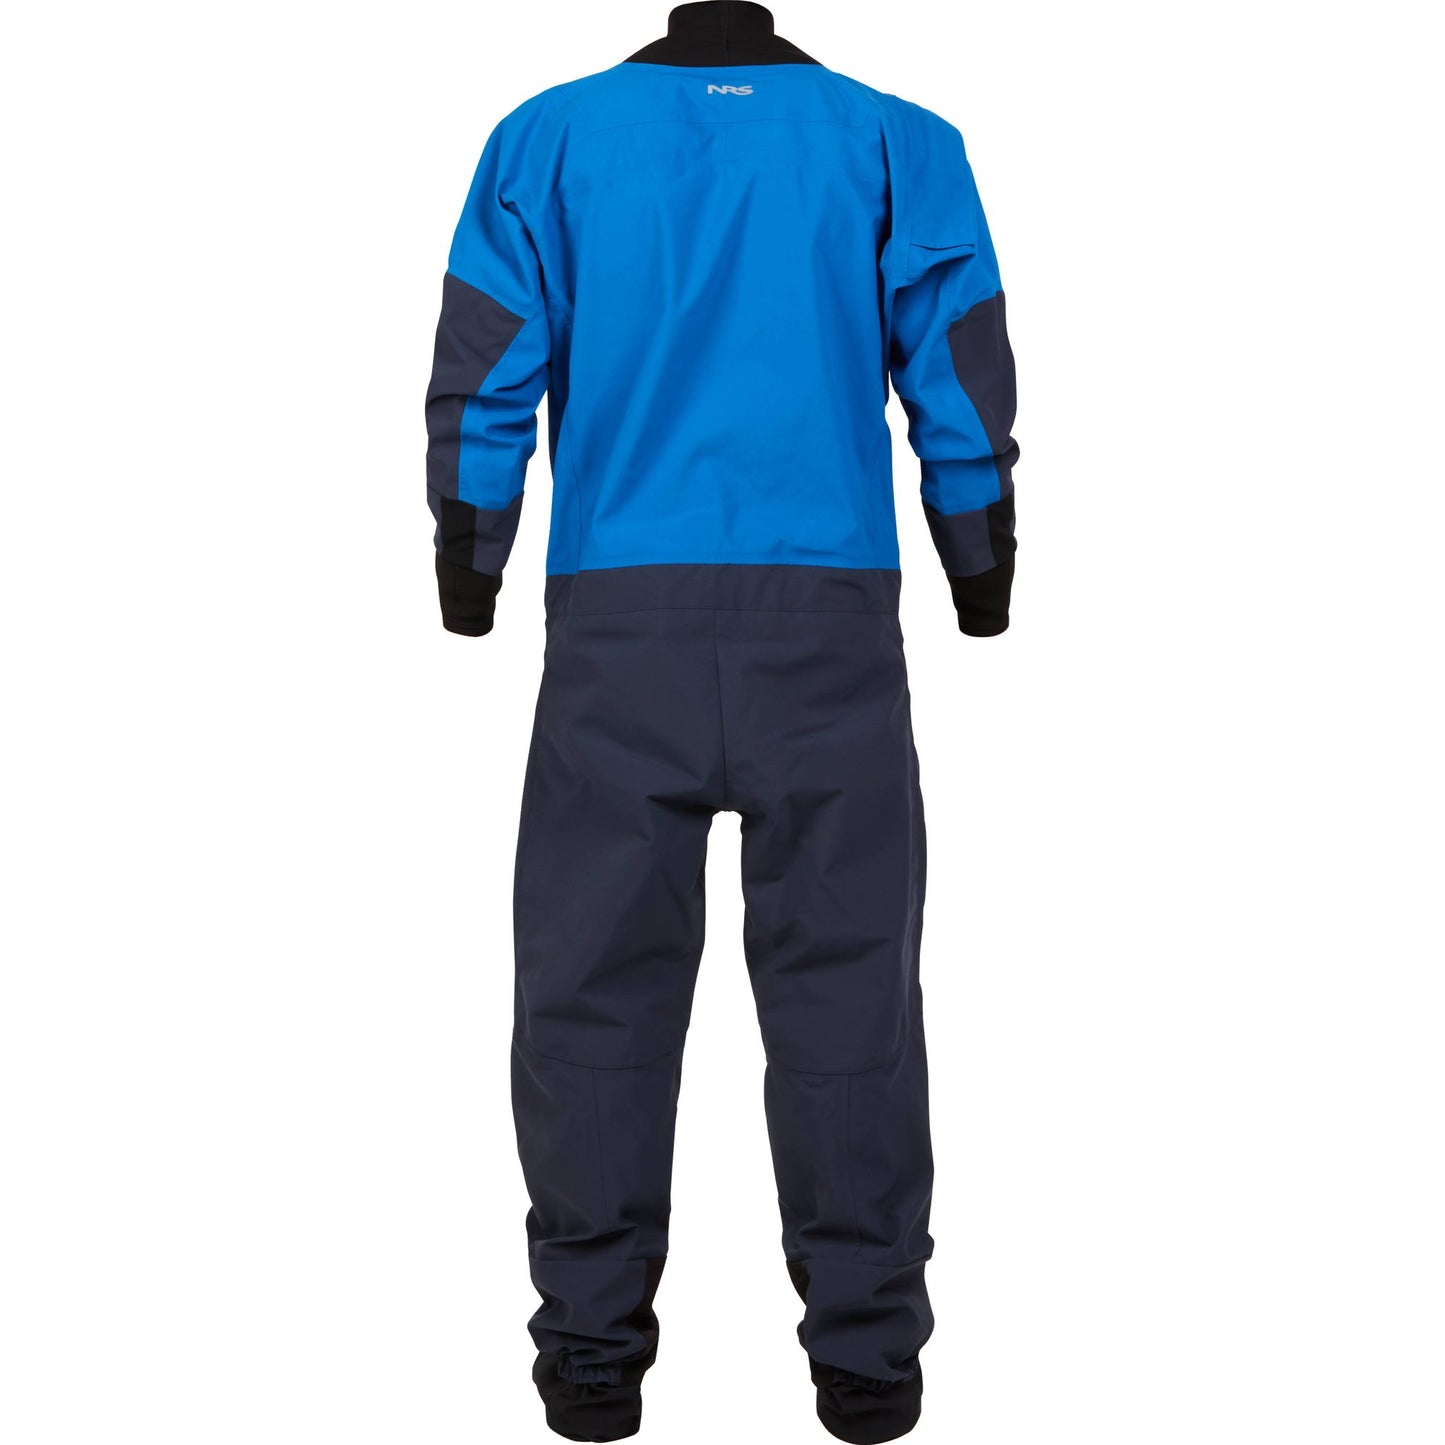 Person in a blue and black NRS Men's Nomad GORE-TEX Pro Semi-Dry Suit standing with their back to the camera.